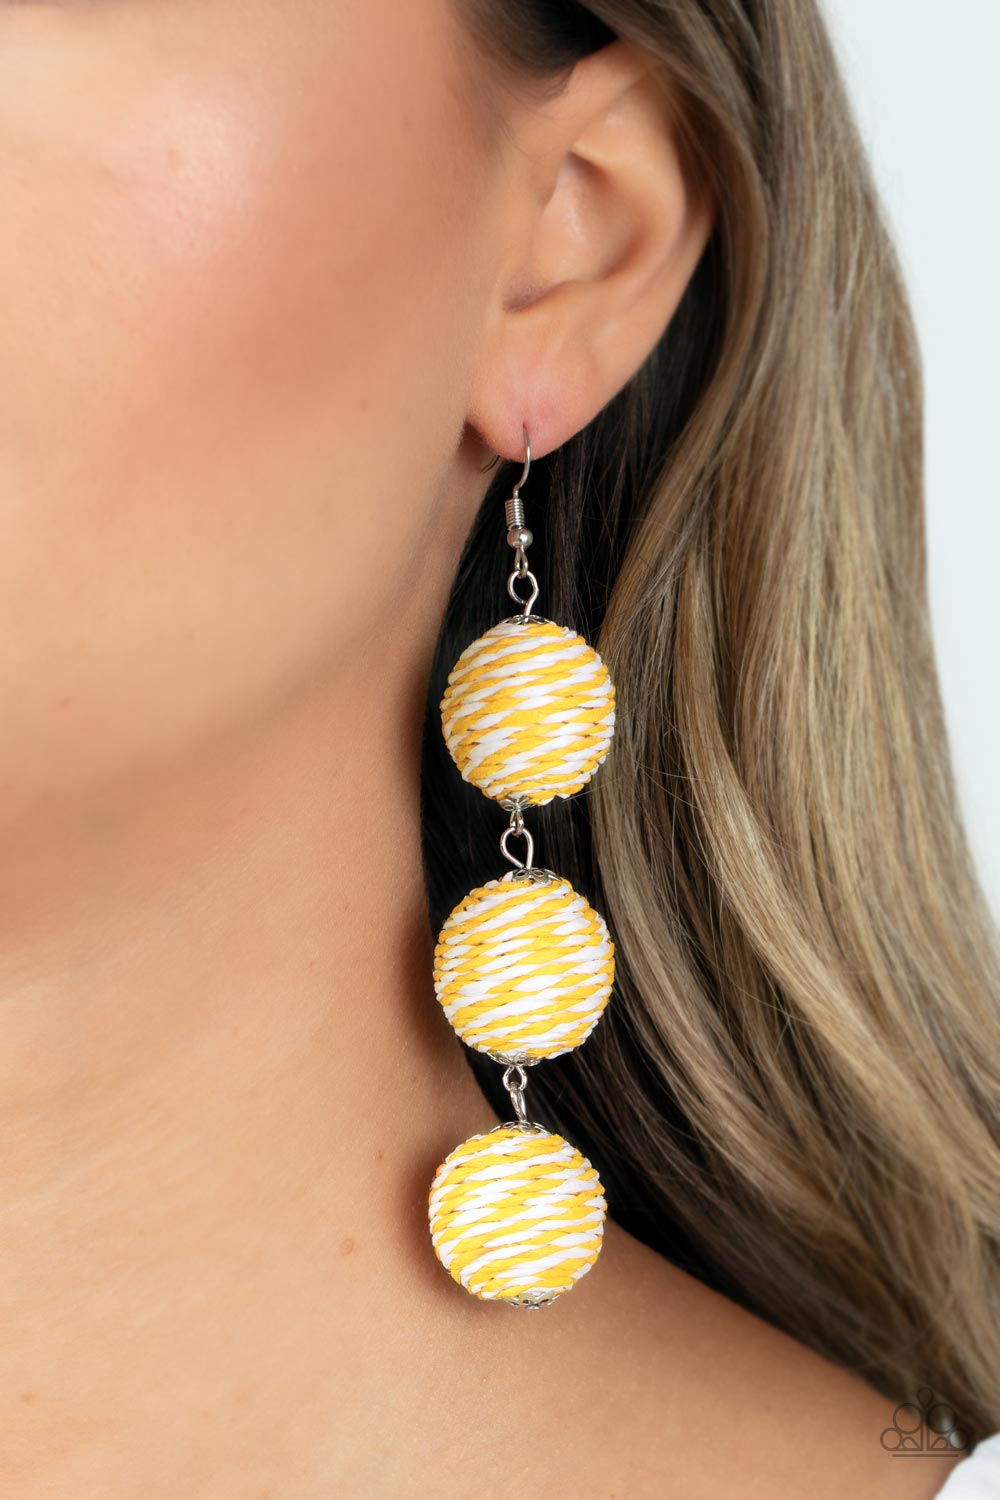 A woven collection of Illuminating and white crepe-like strings ornately wraps around three hanging beads, reminiscent of decorative party lanterns. Earring attaches to a standard fishhook fitting.  Sold as one pair of earrings.